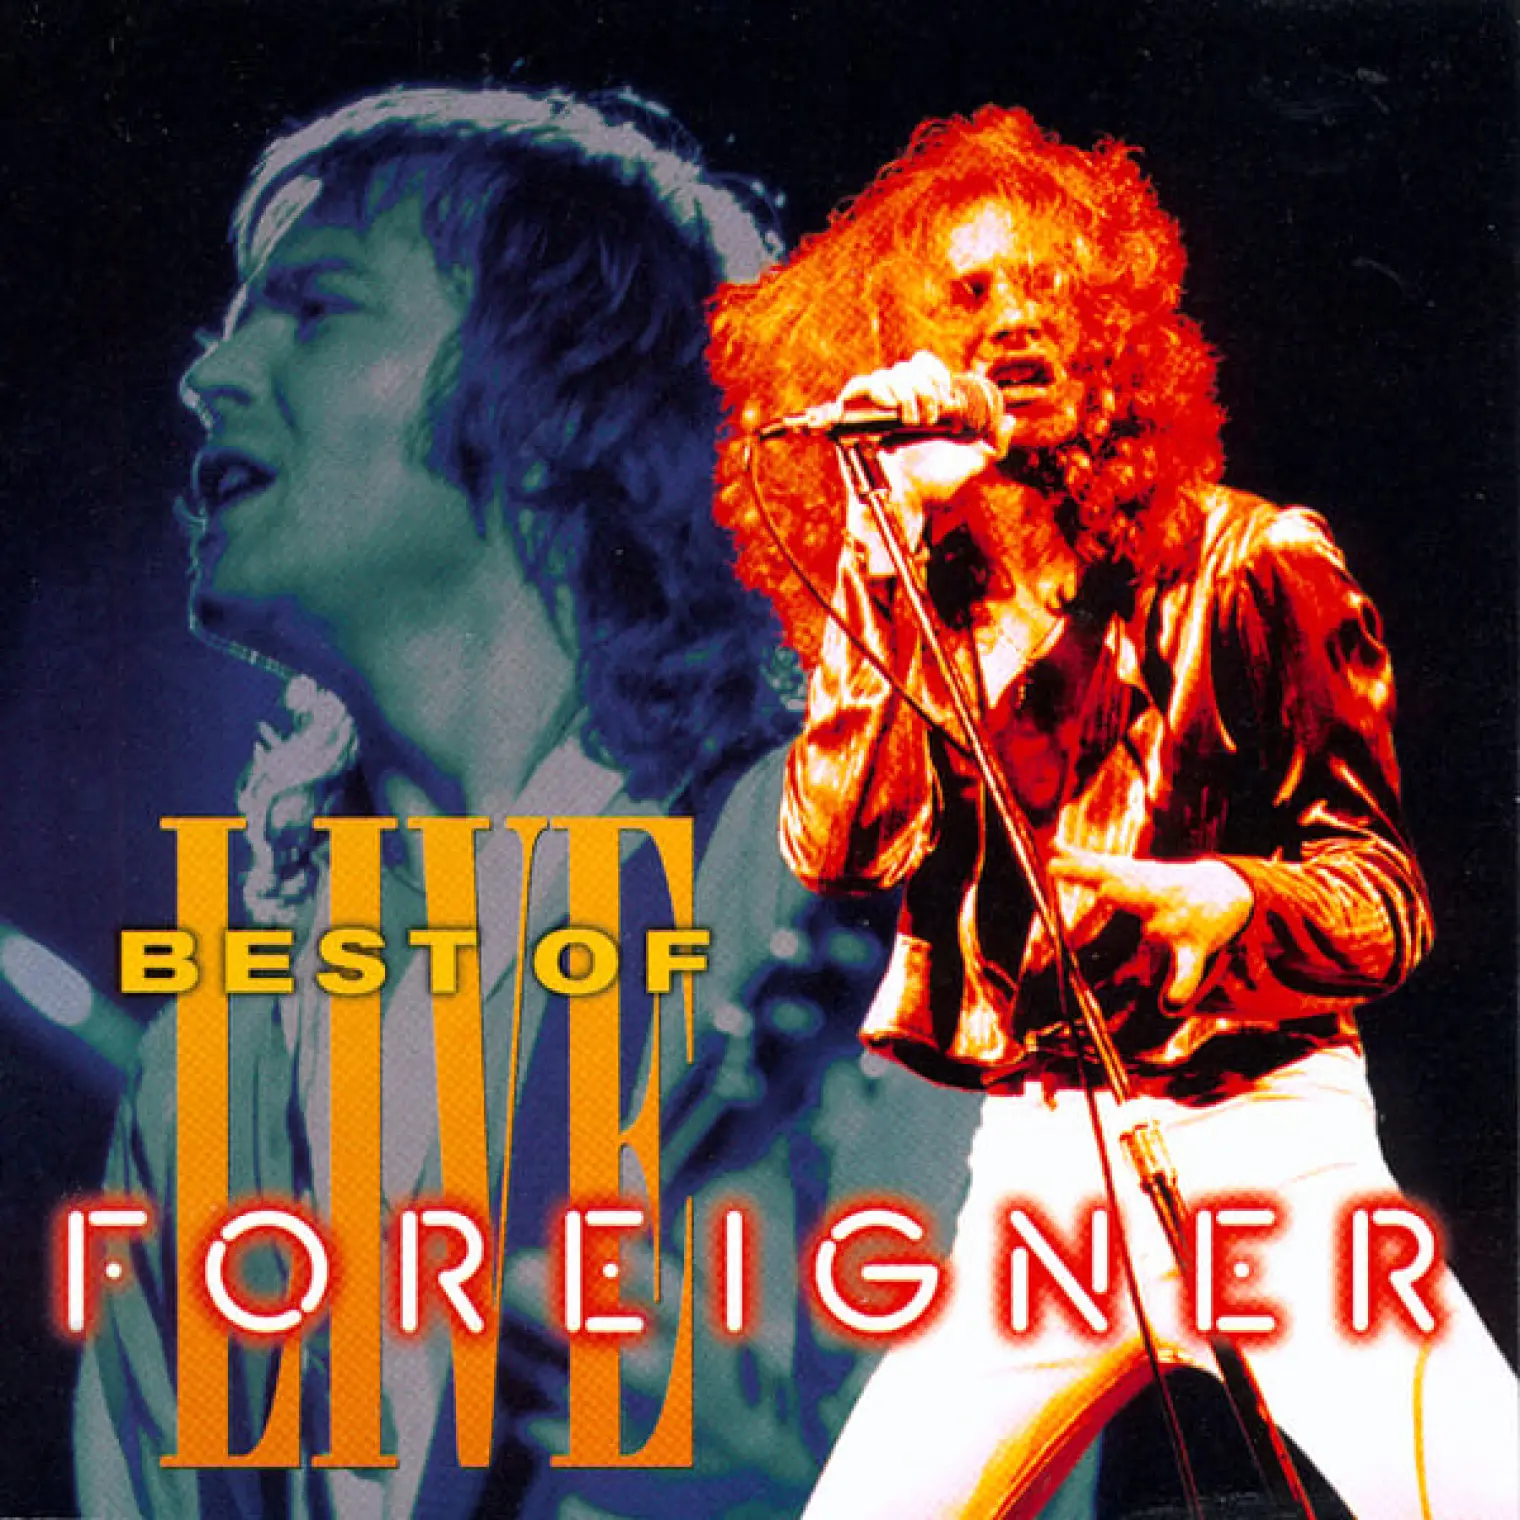 Best Of Live -  Foreigner 